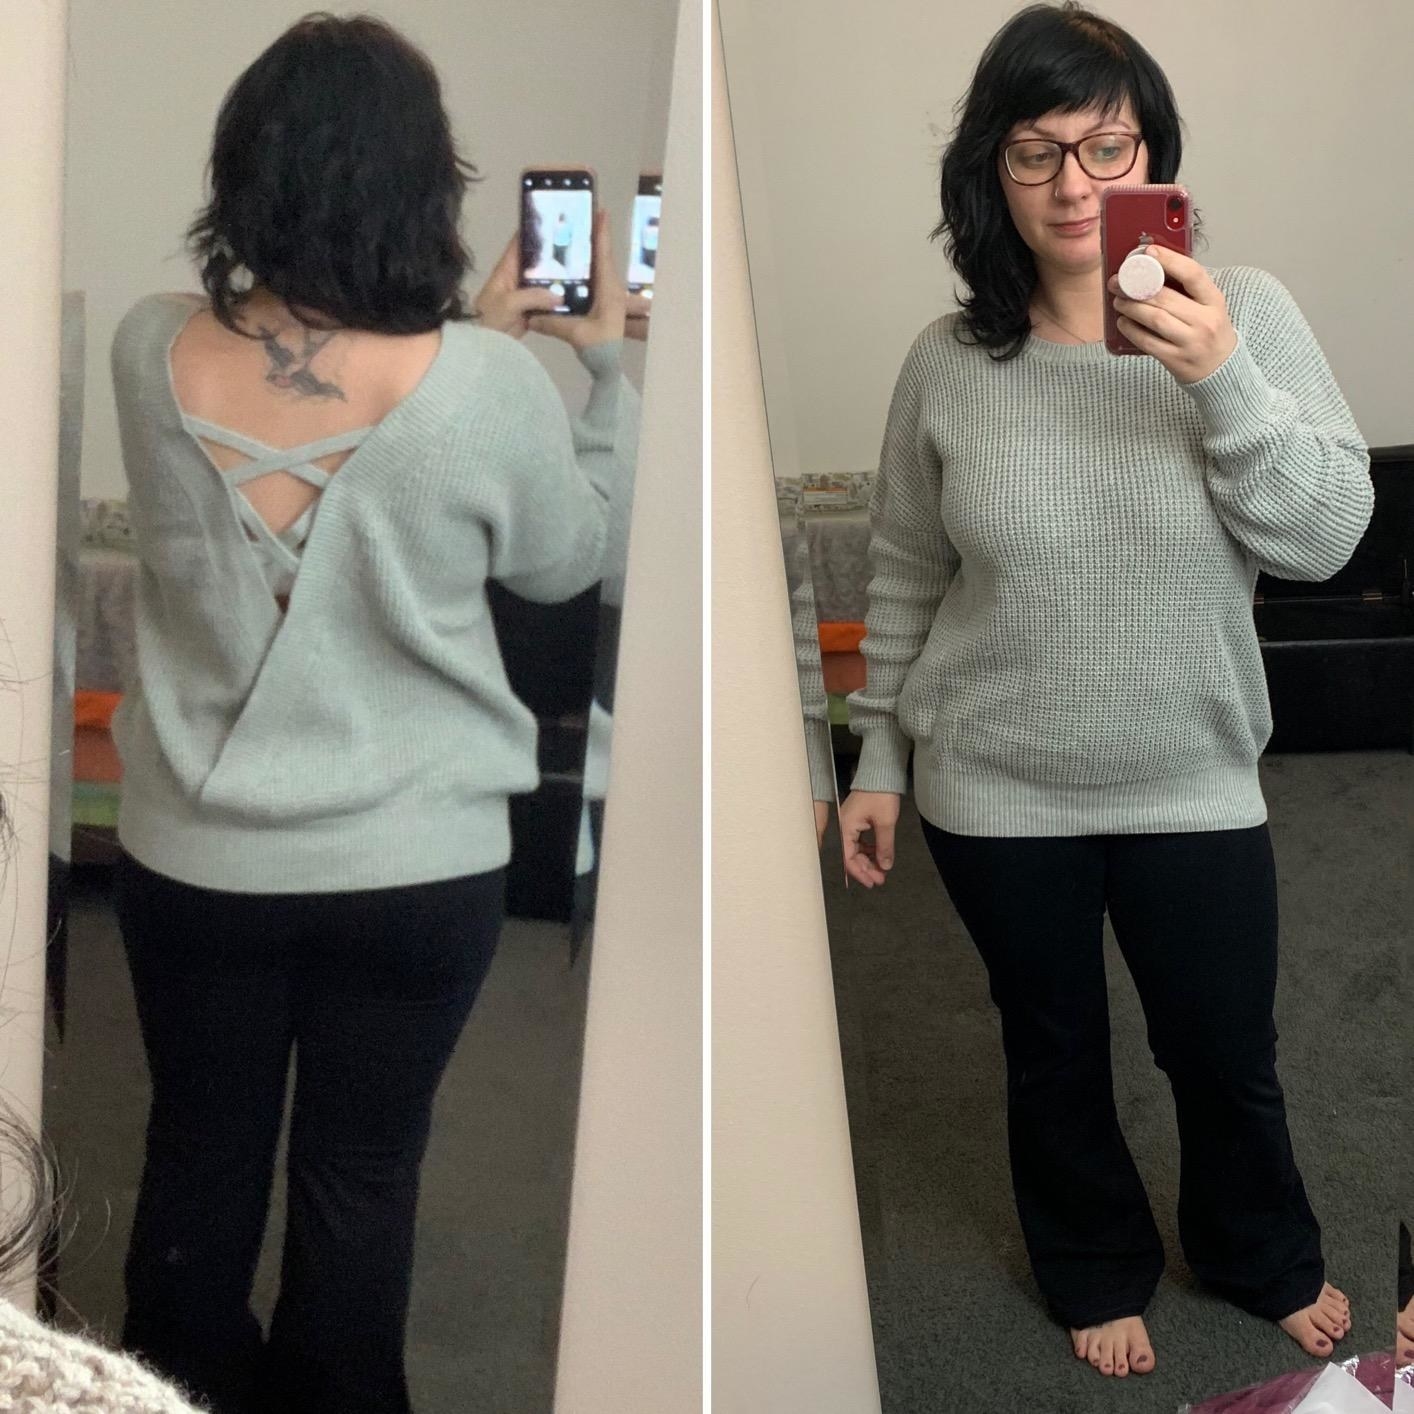 Reviewer in the light blue-criss cross back sweater from the front and back